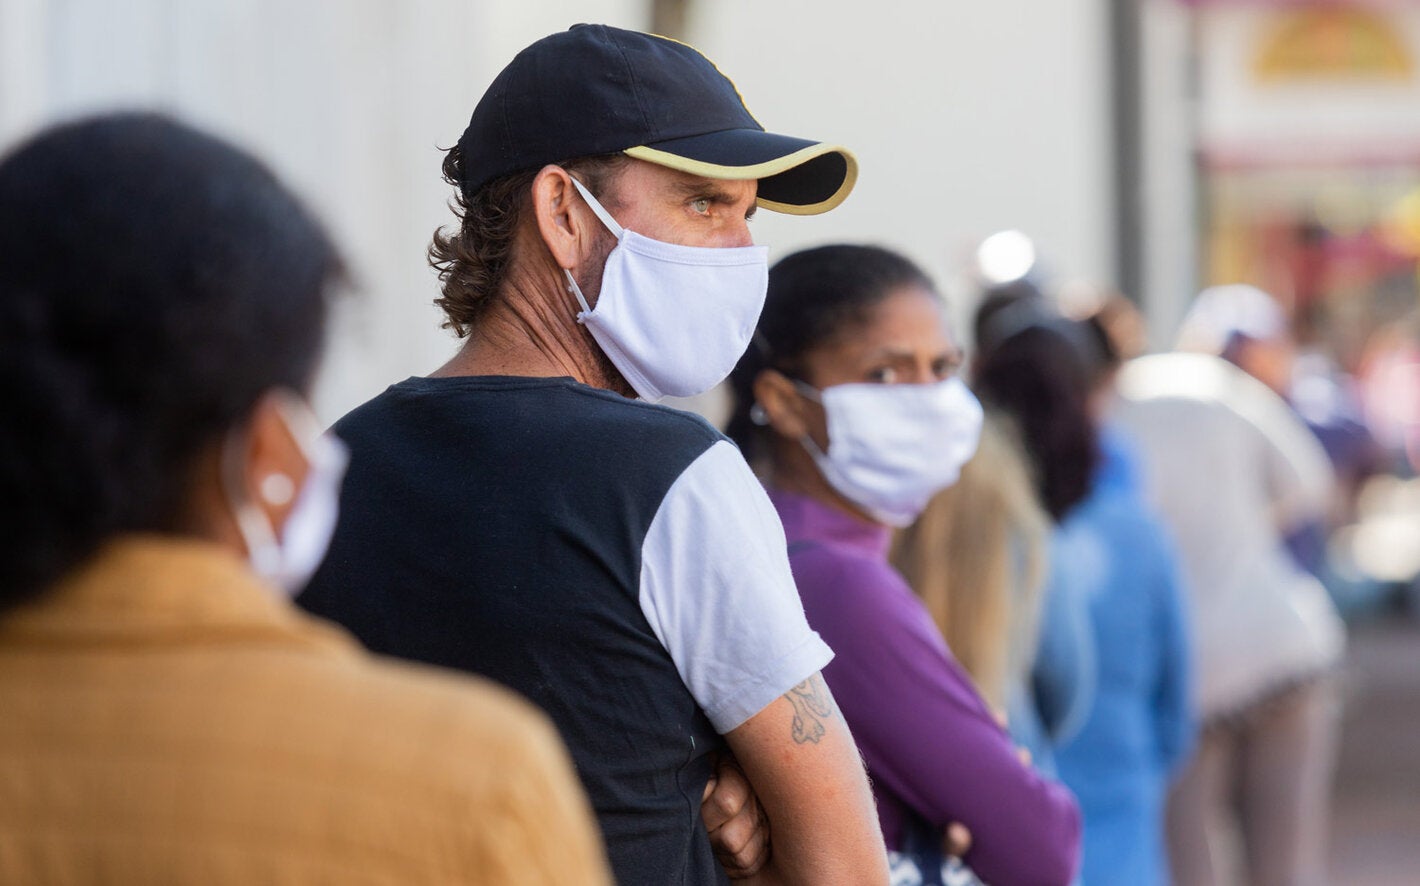 People wearing masks to protect themselves against COVID-19